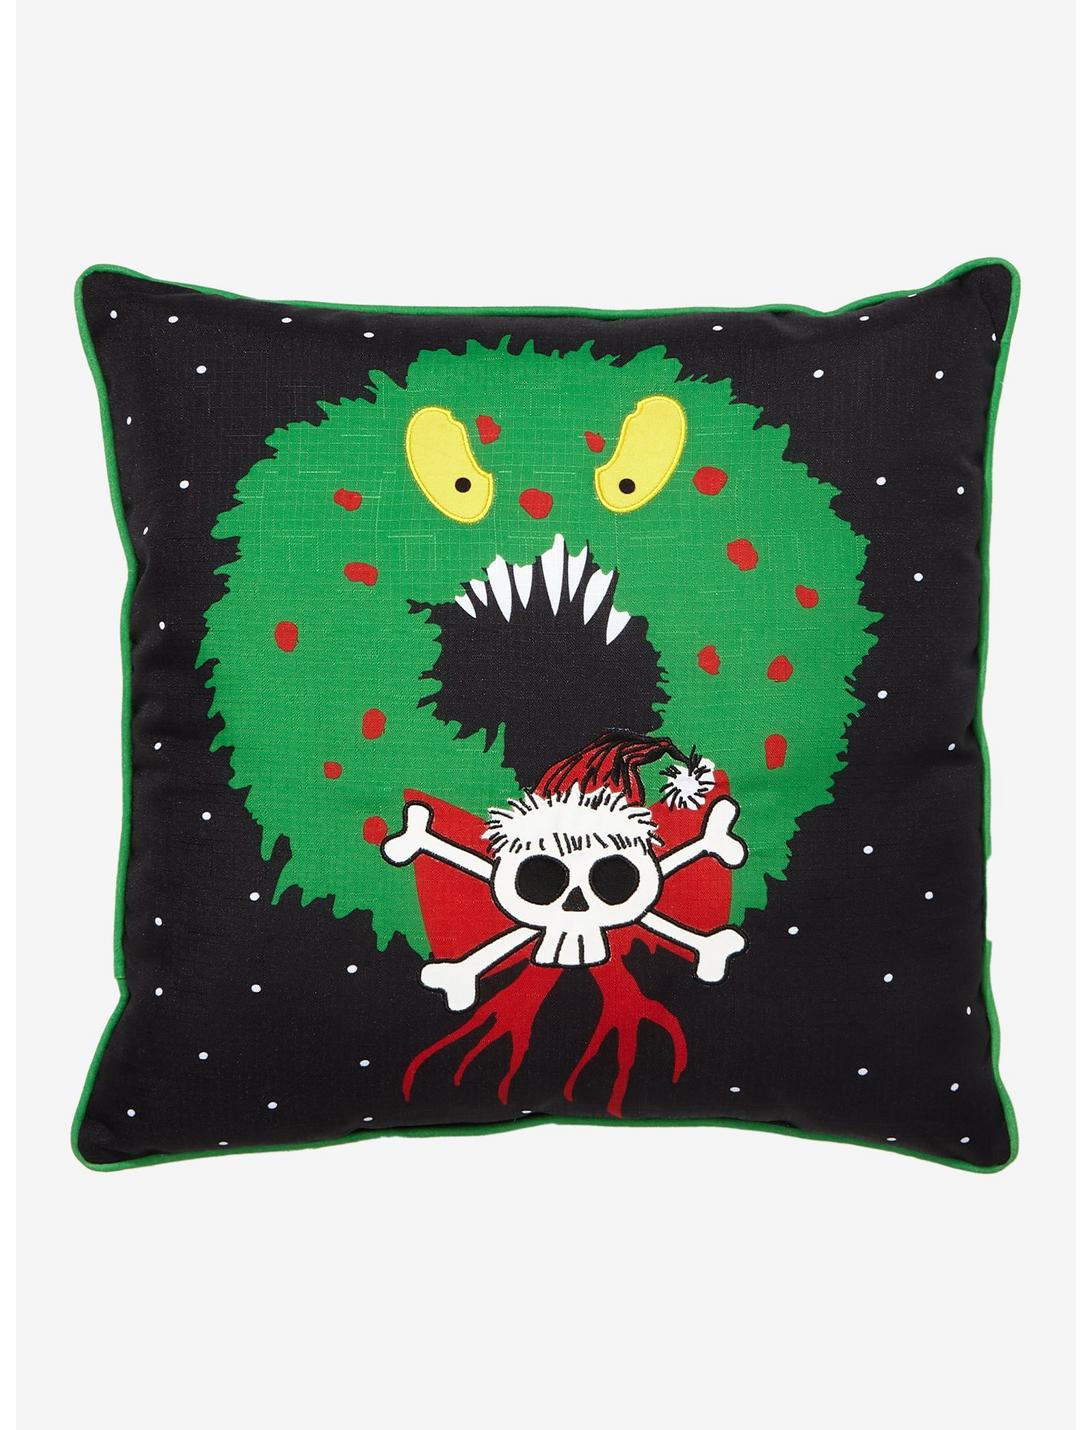 The Nightmare Before Christmas Monster Wreath Pillow, , hi-res